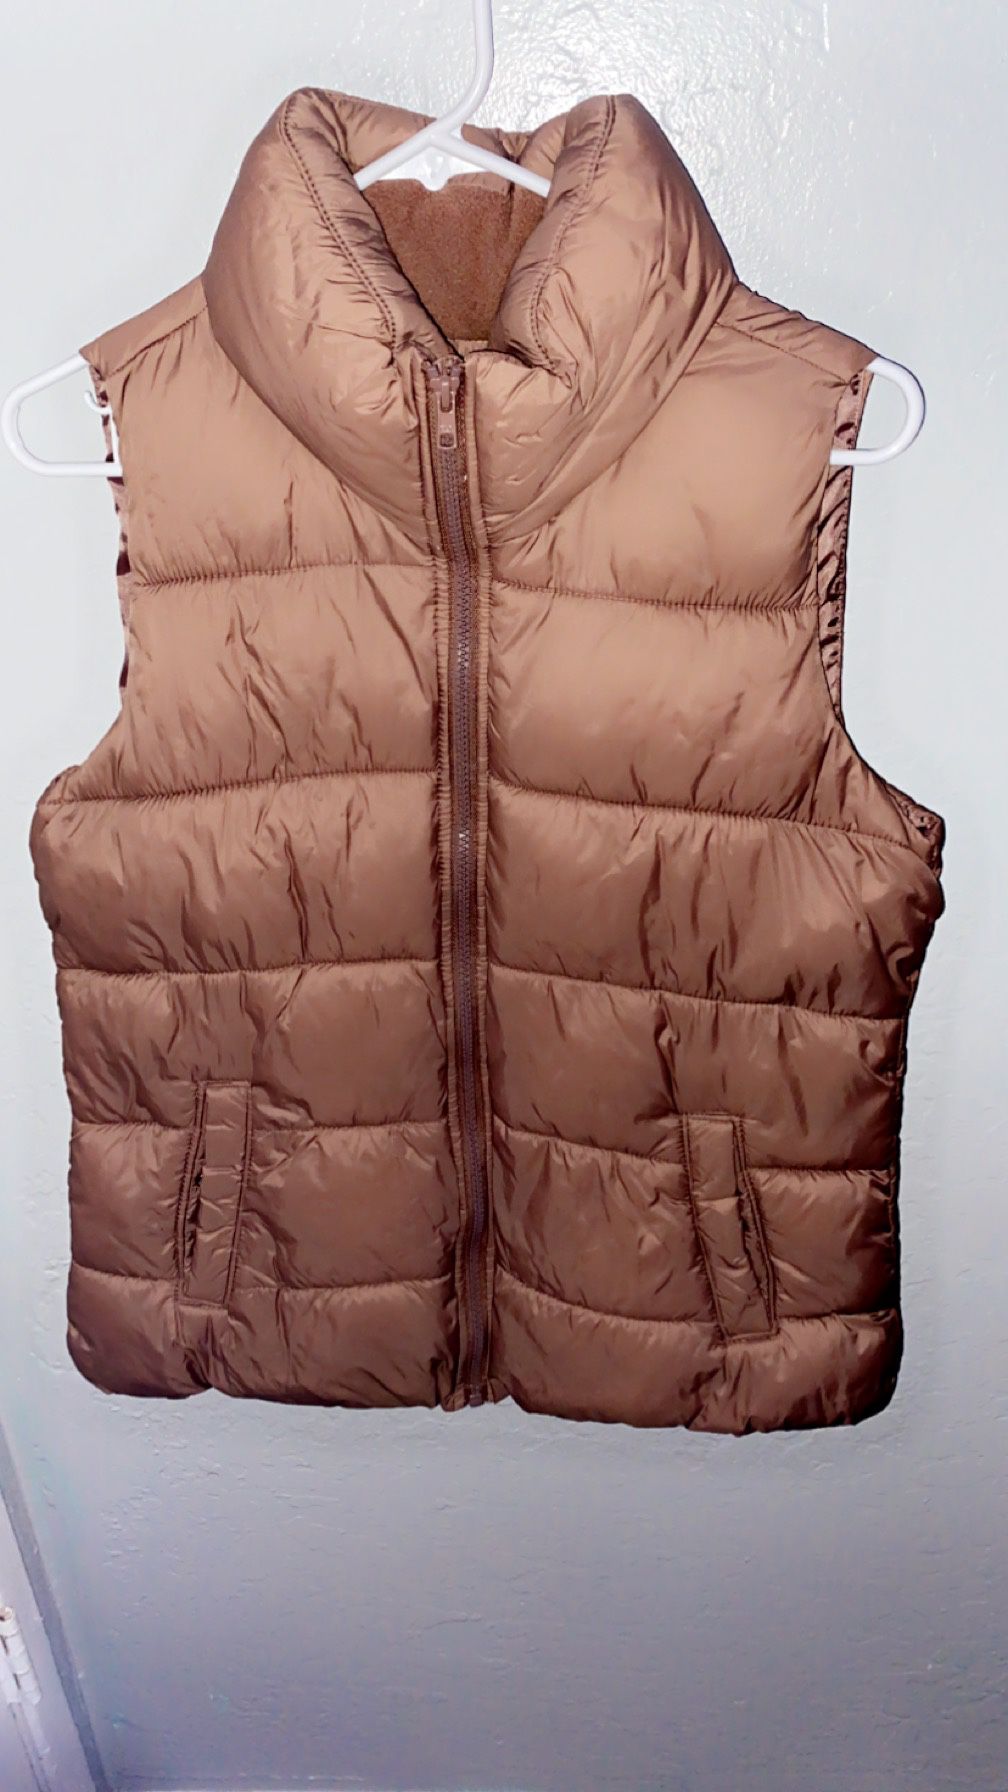 old navy puffer vest size small can fit med